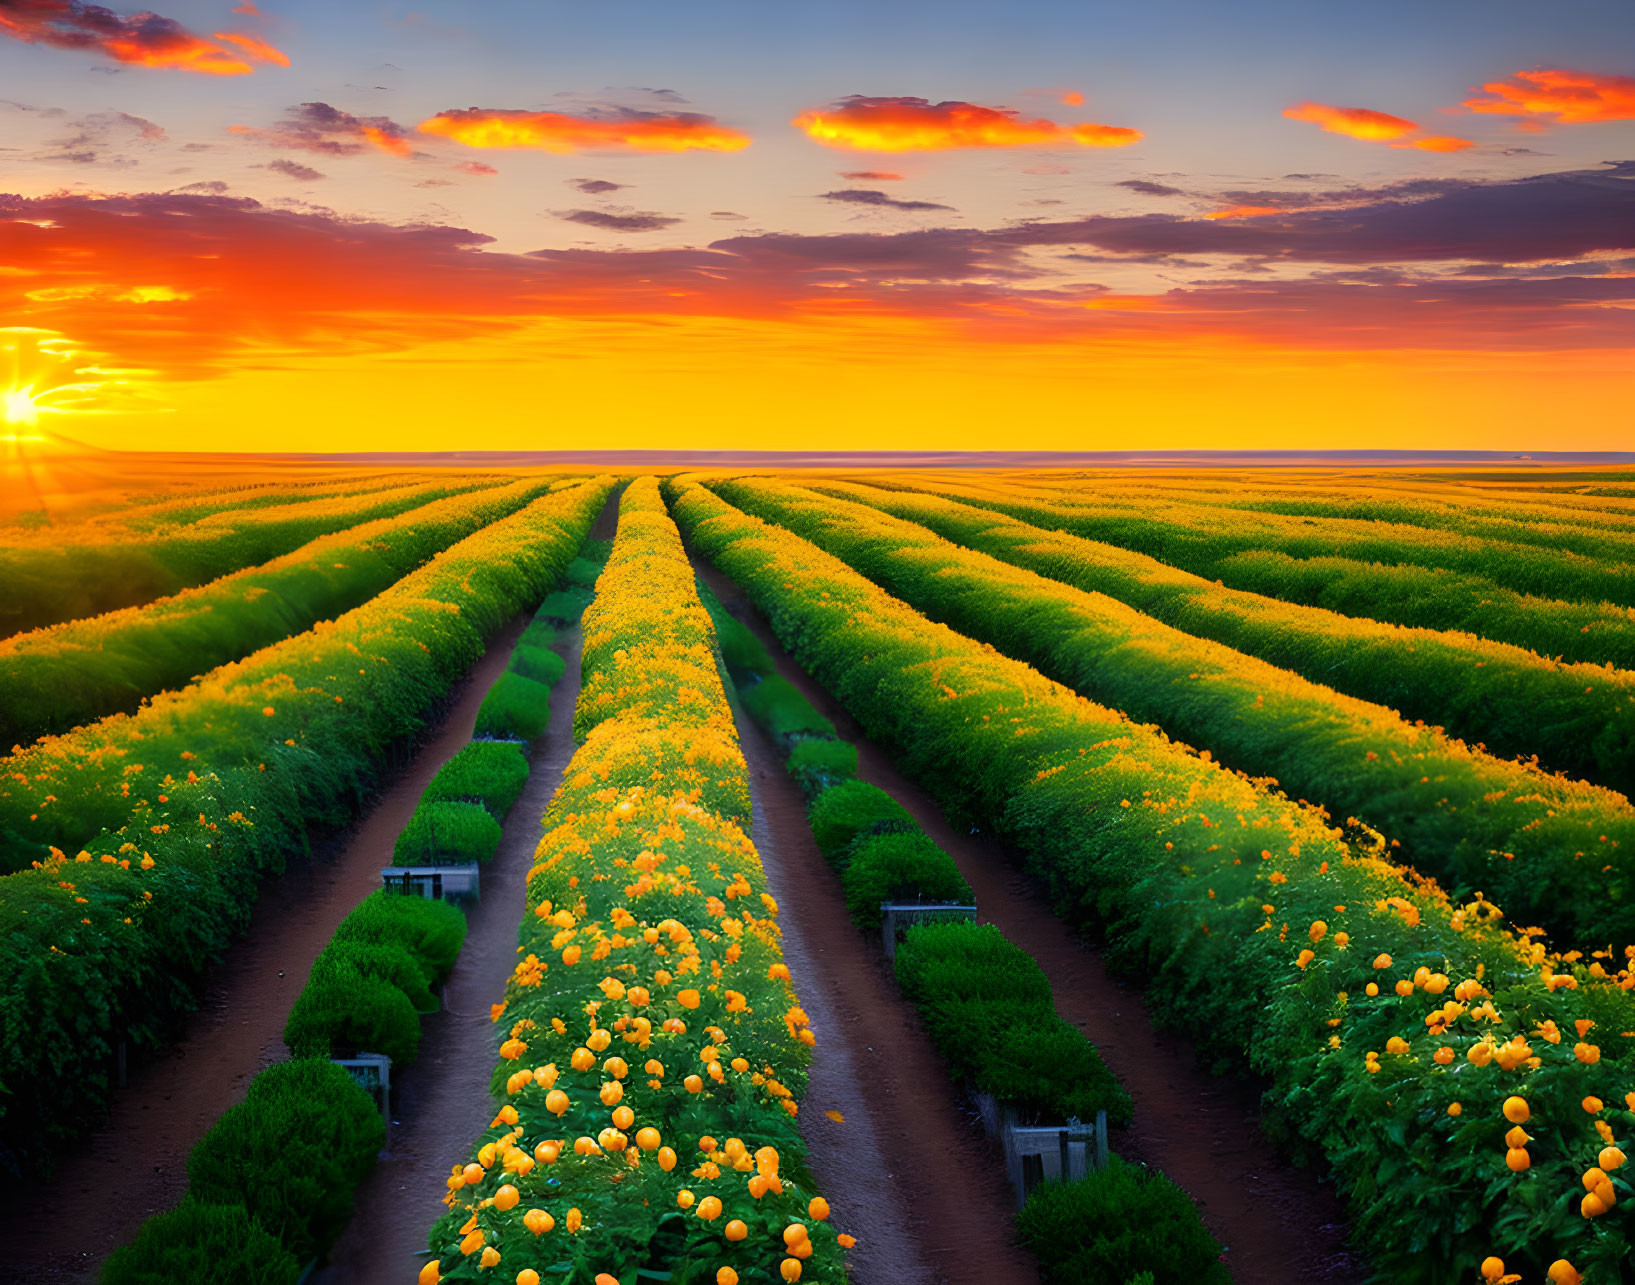 Field of Yellow Flowers at Sunset with Orange and Blue Sky